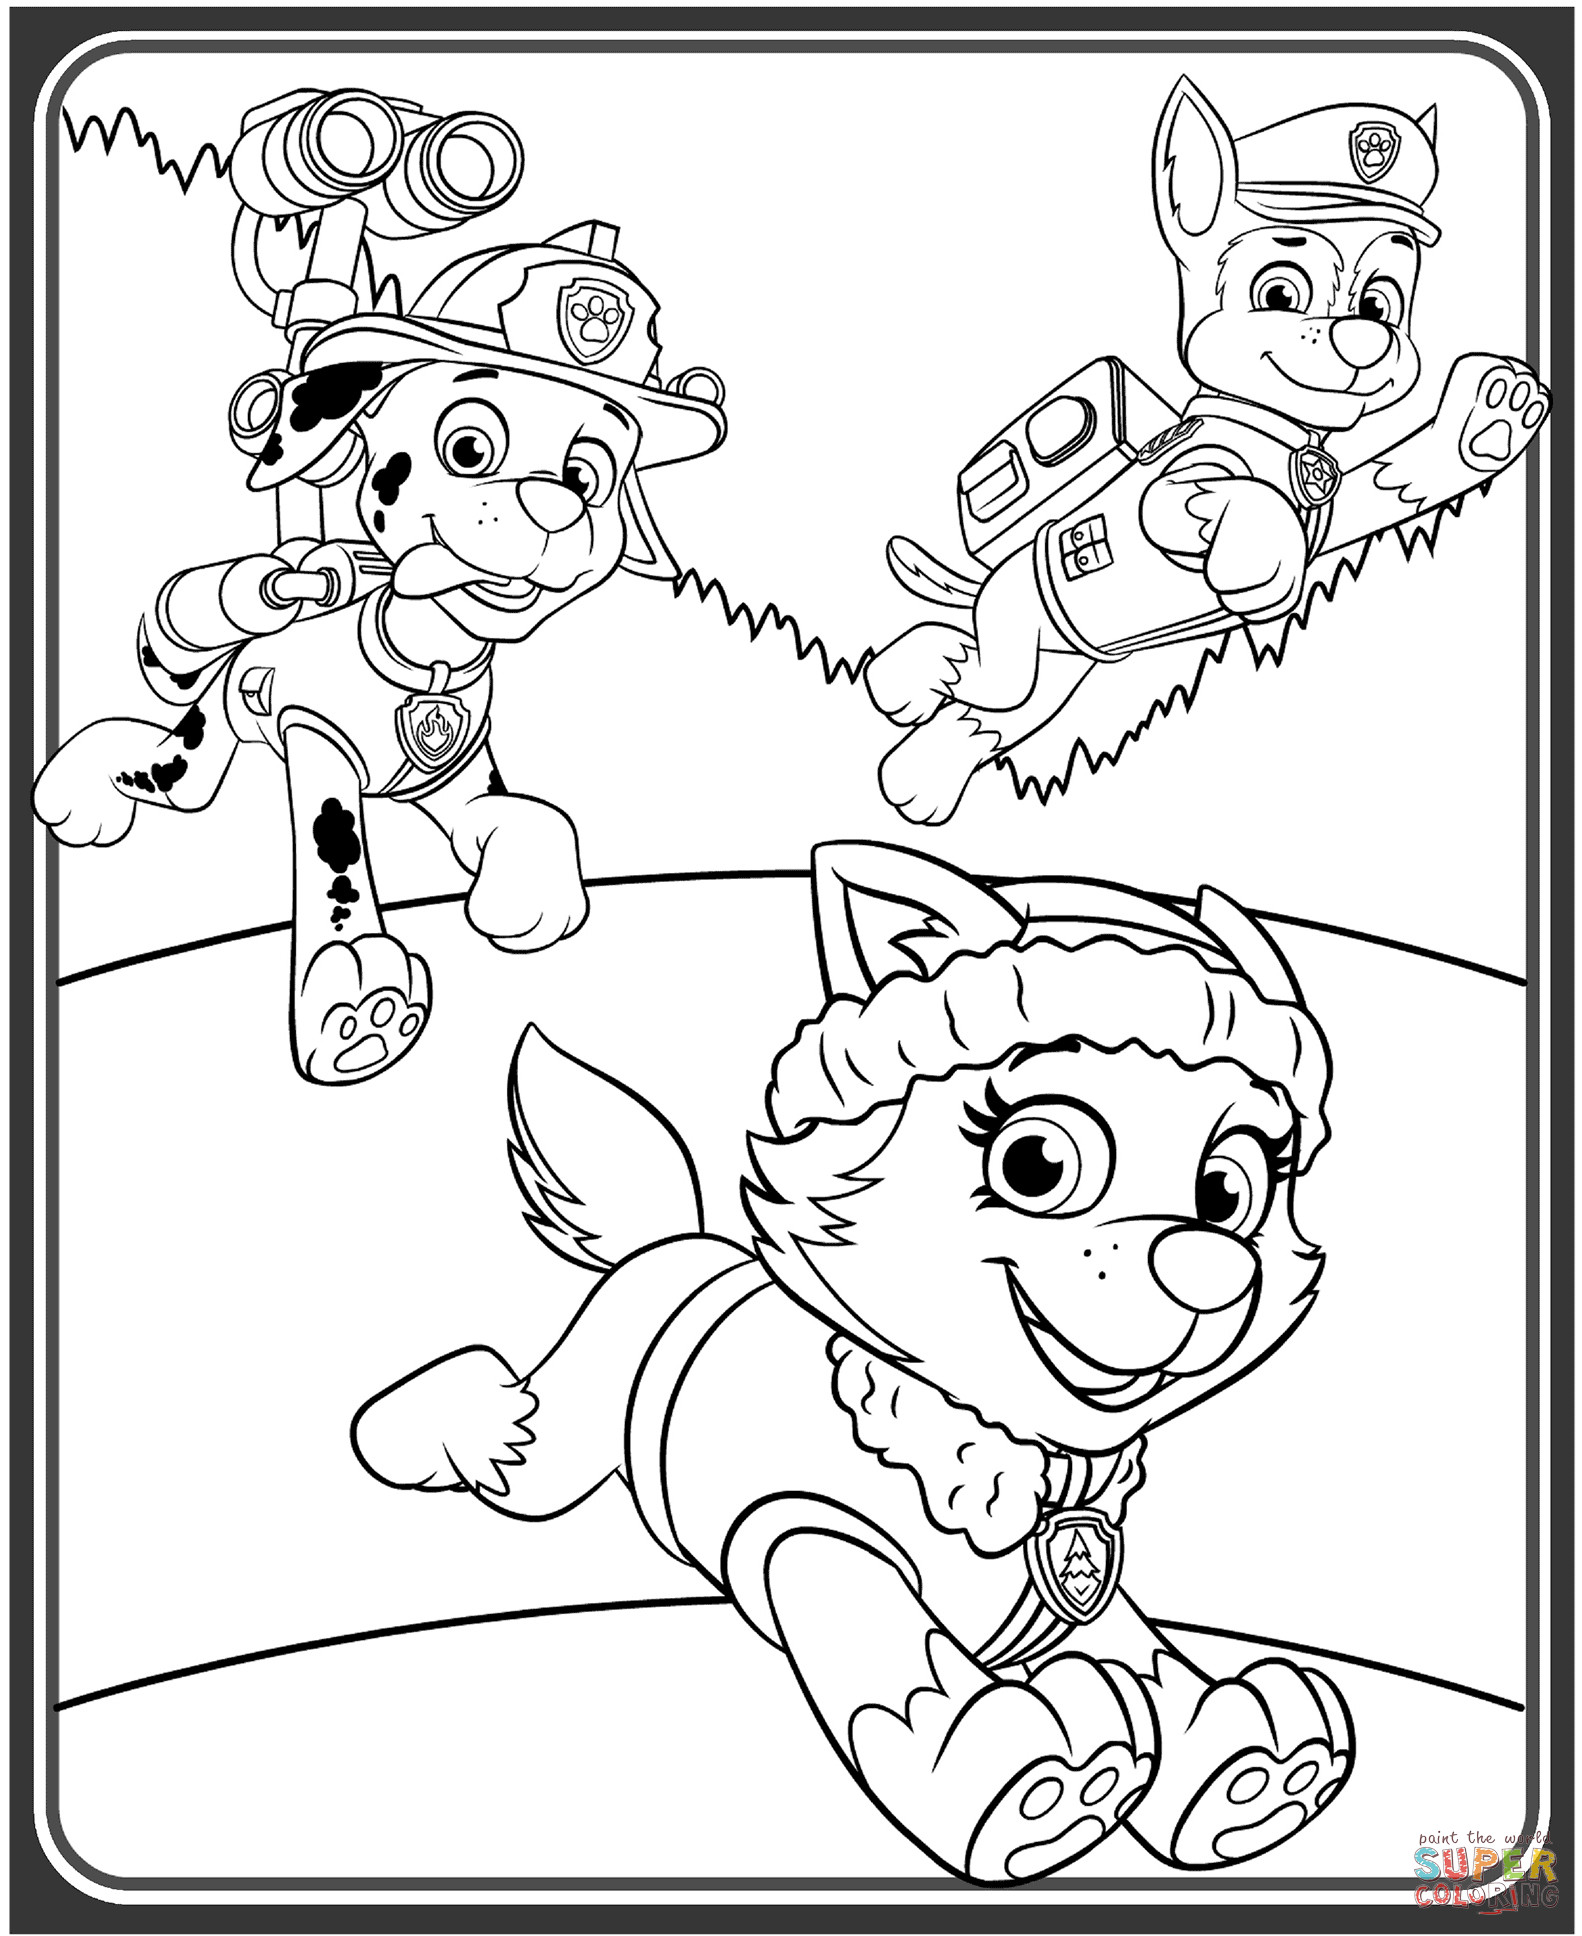 Paw Patrol Coloring Pages Everest
 Everest Marshall and Chase coloring page